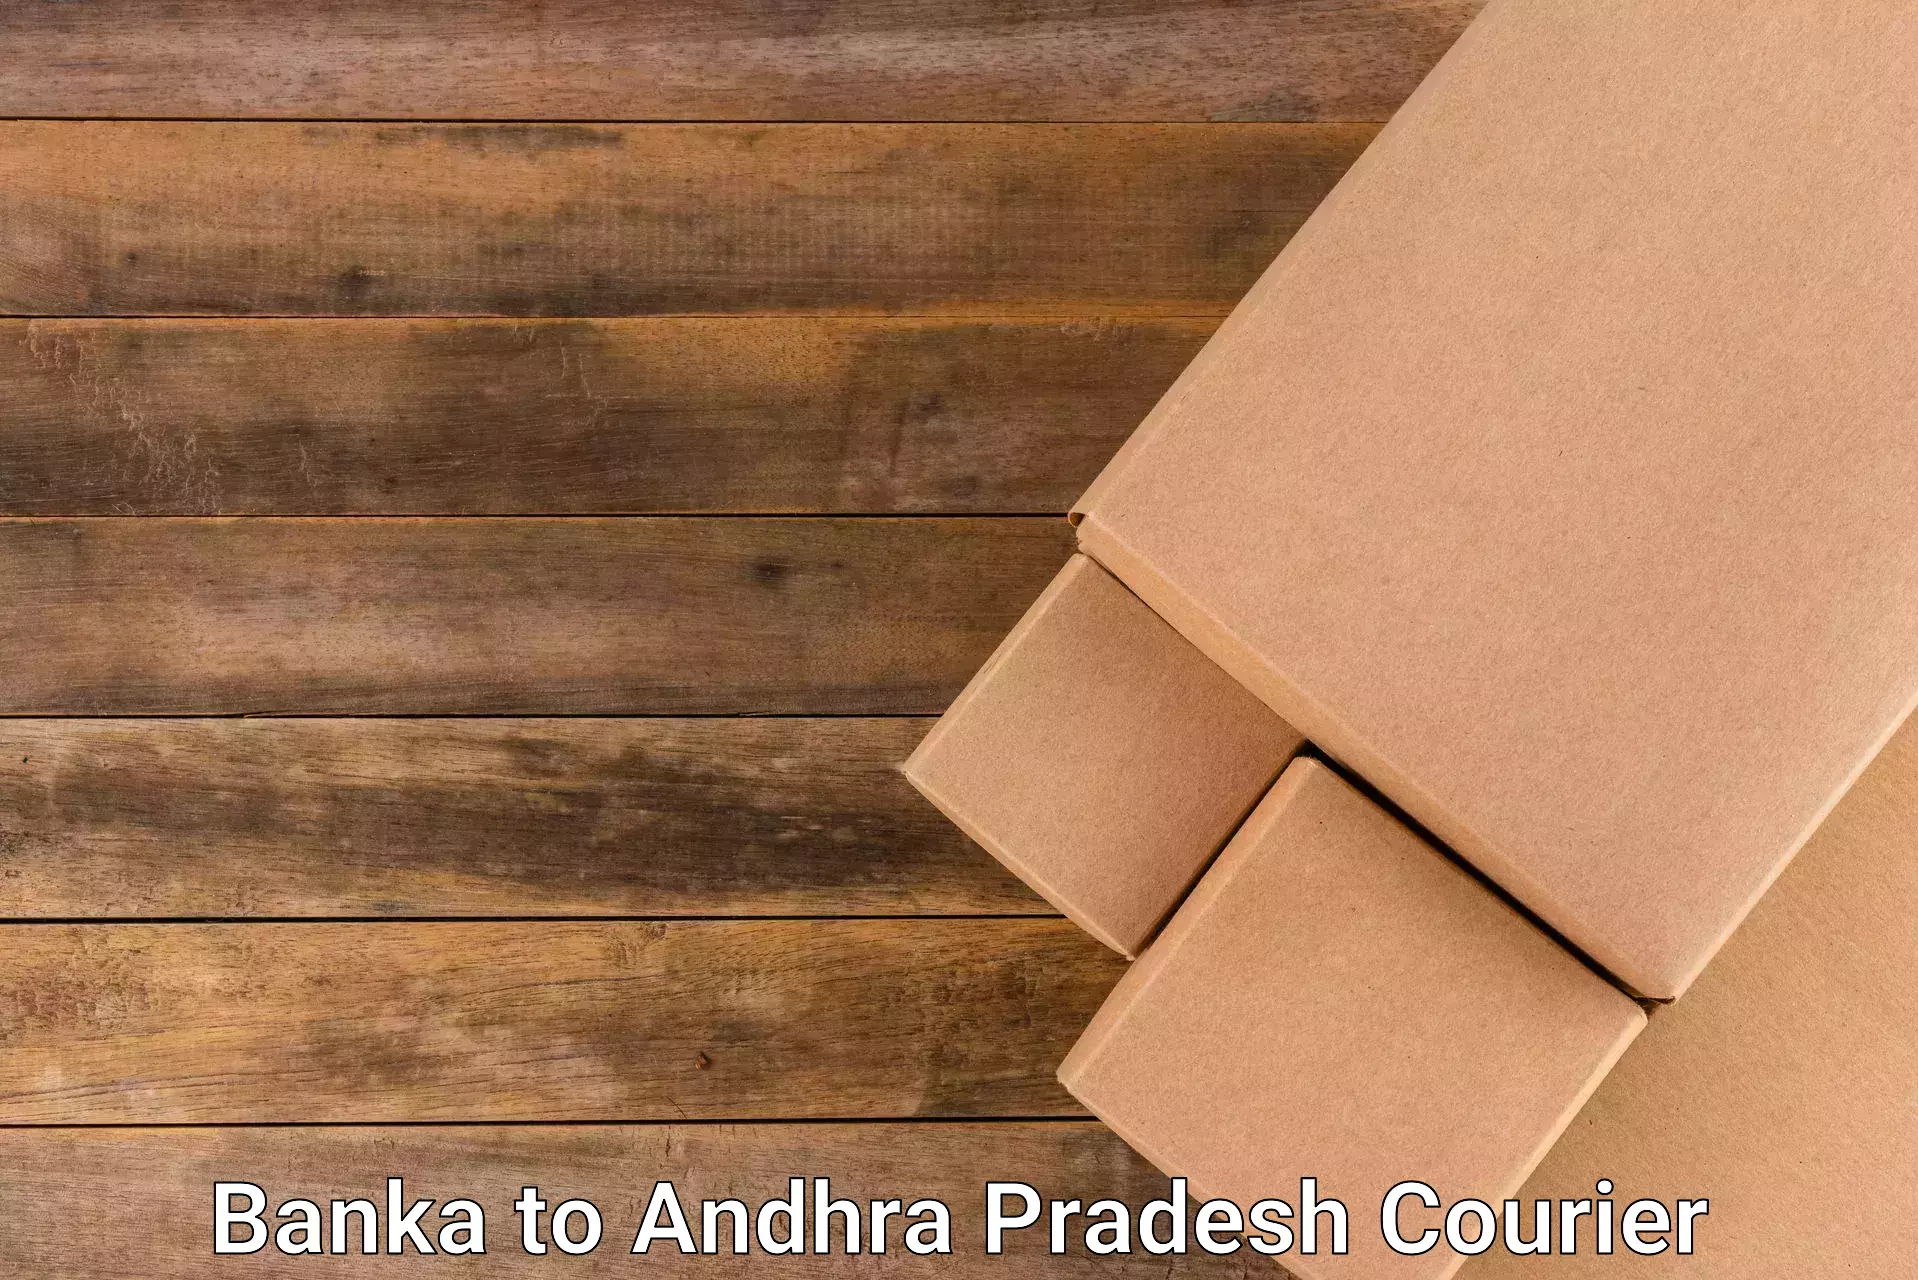 Online package tracking in Banka to Tenali